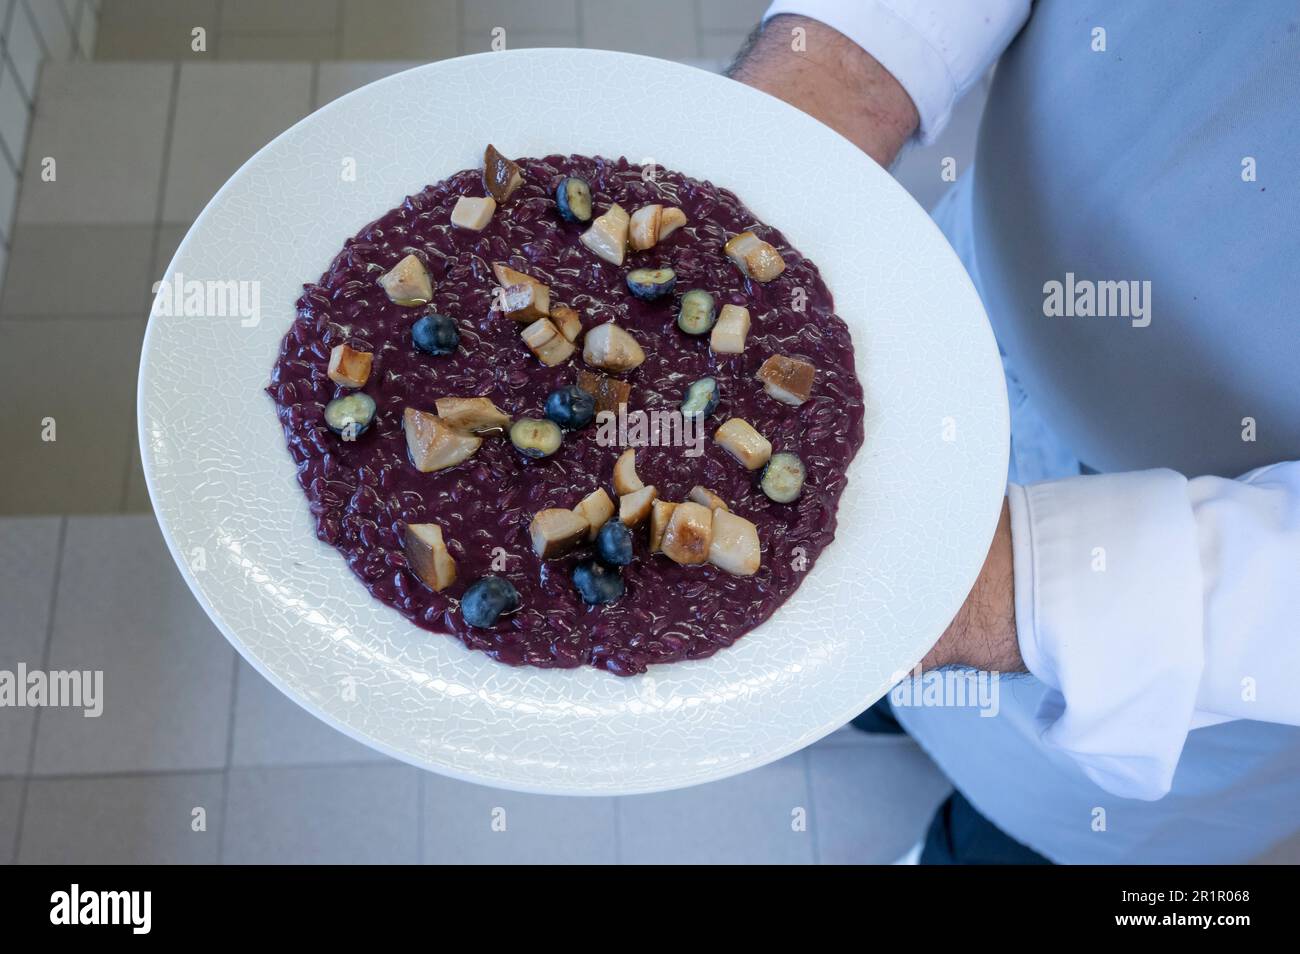 Italy, Trentino Alto Adige, Alto Adige - South Tyrol, Valle Isarco, Bressanone, vegan cuisine with animal product-free ingredients, Provincial Vocational School for the Hospitality and Food Industry, Emma Hellenstainer, Armin Mairhofer, carnaroli rice, blueberries, oak moss Stock Photo